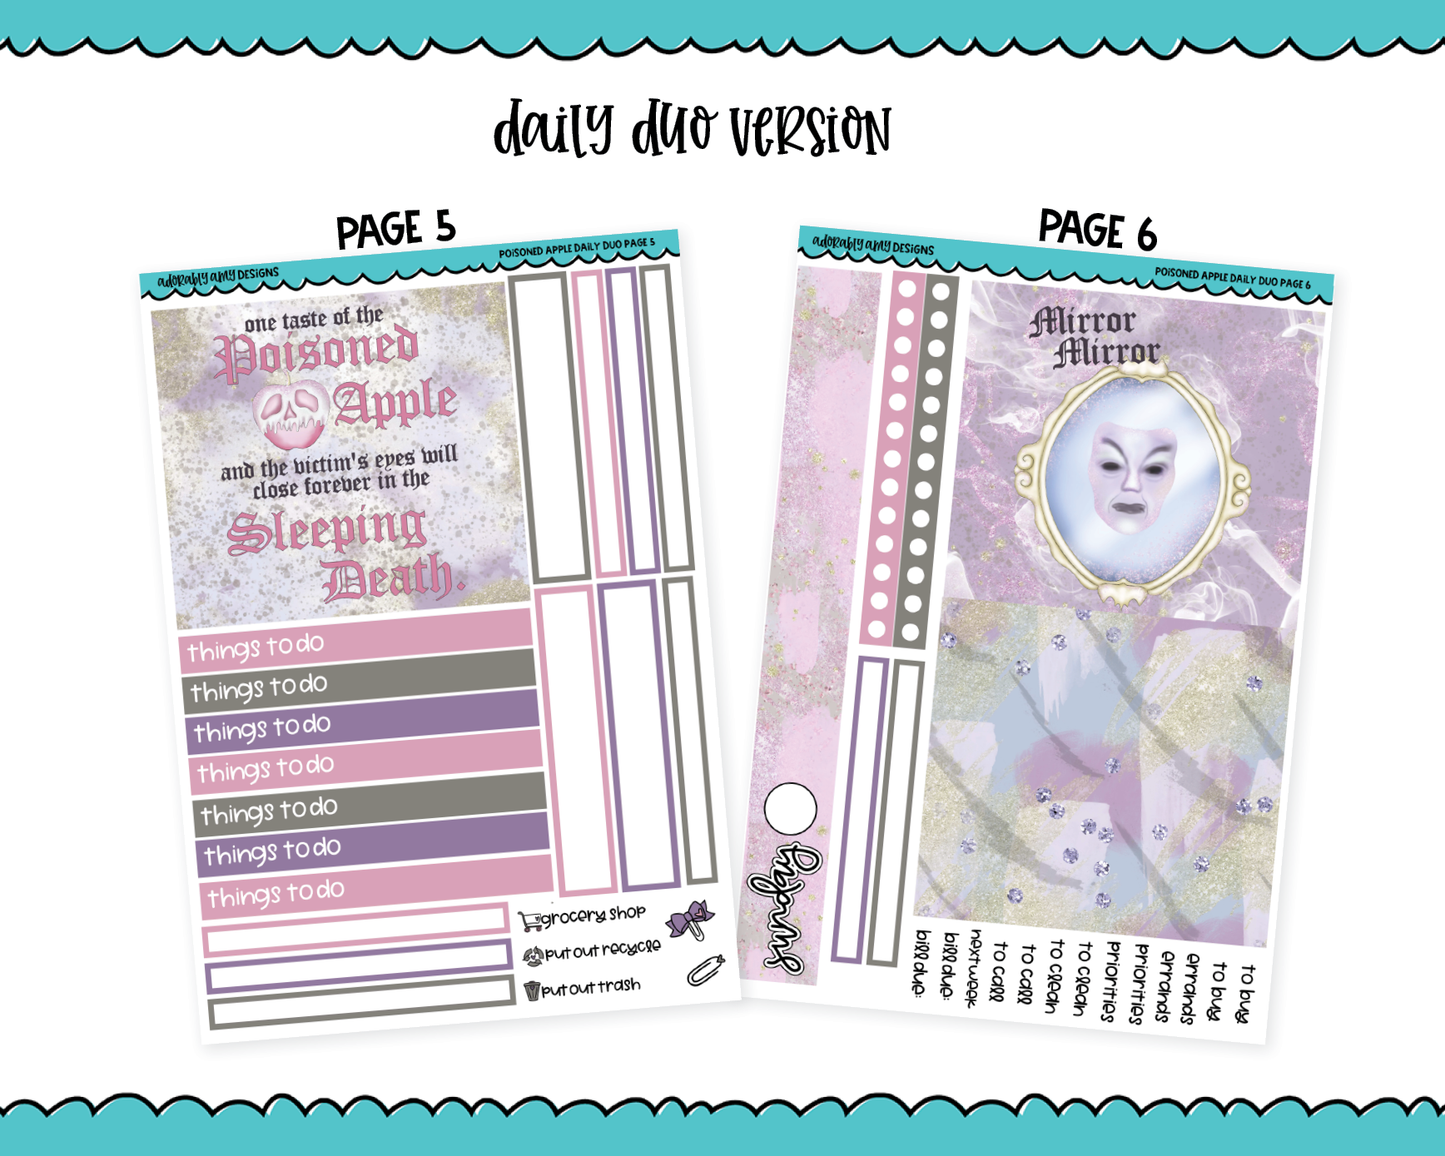 Daily Duo Poisoned Apple Evil Queen Themed Weekly Planner Sticker Kit for Daily Duo Planner